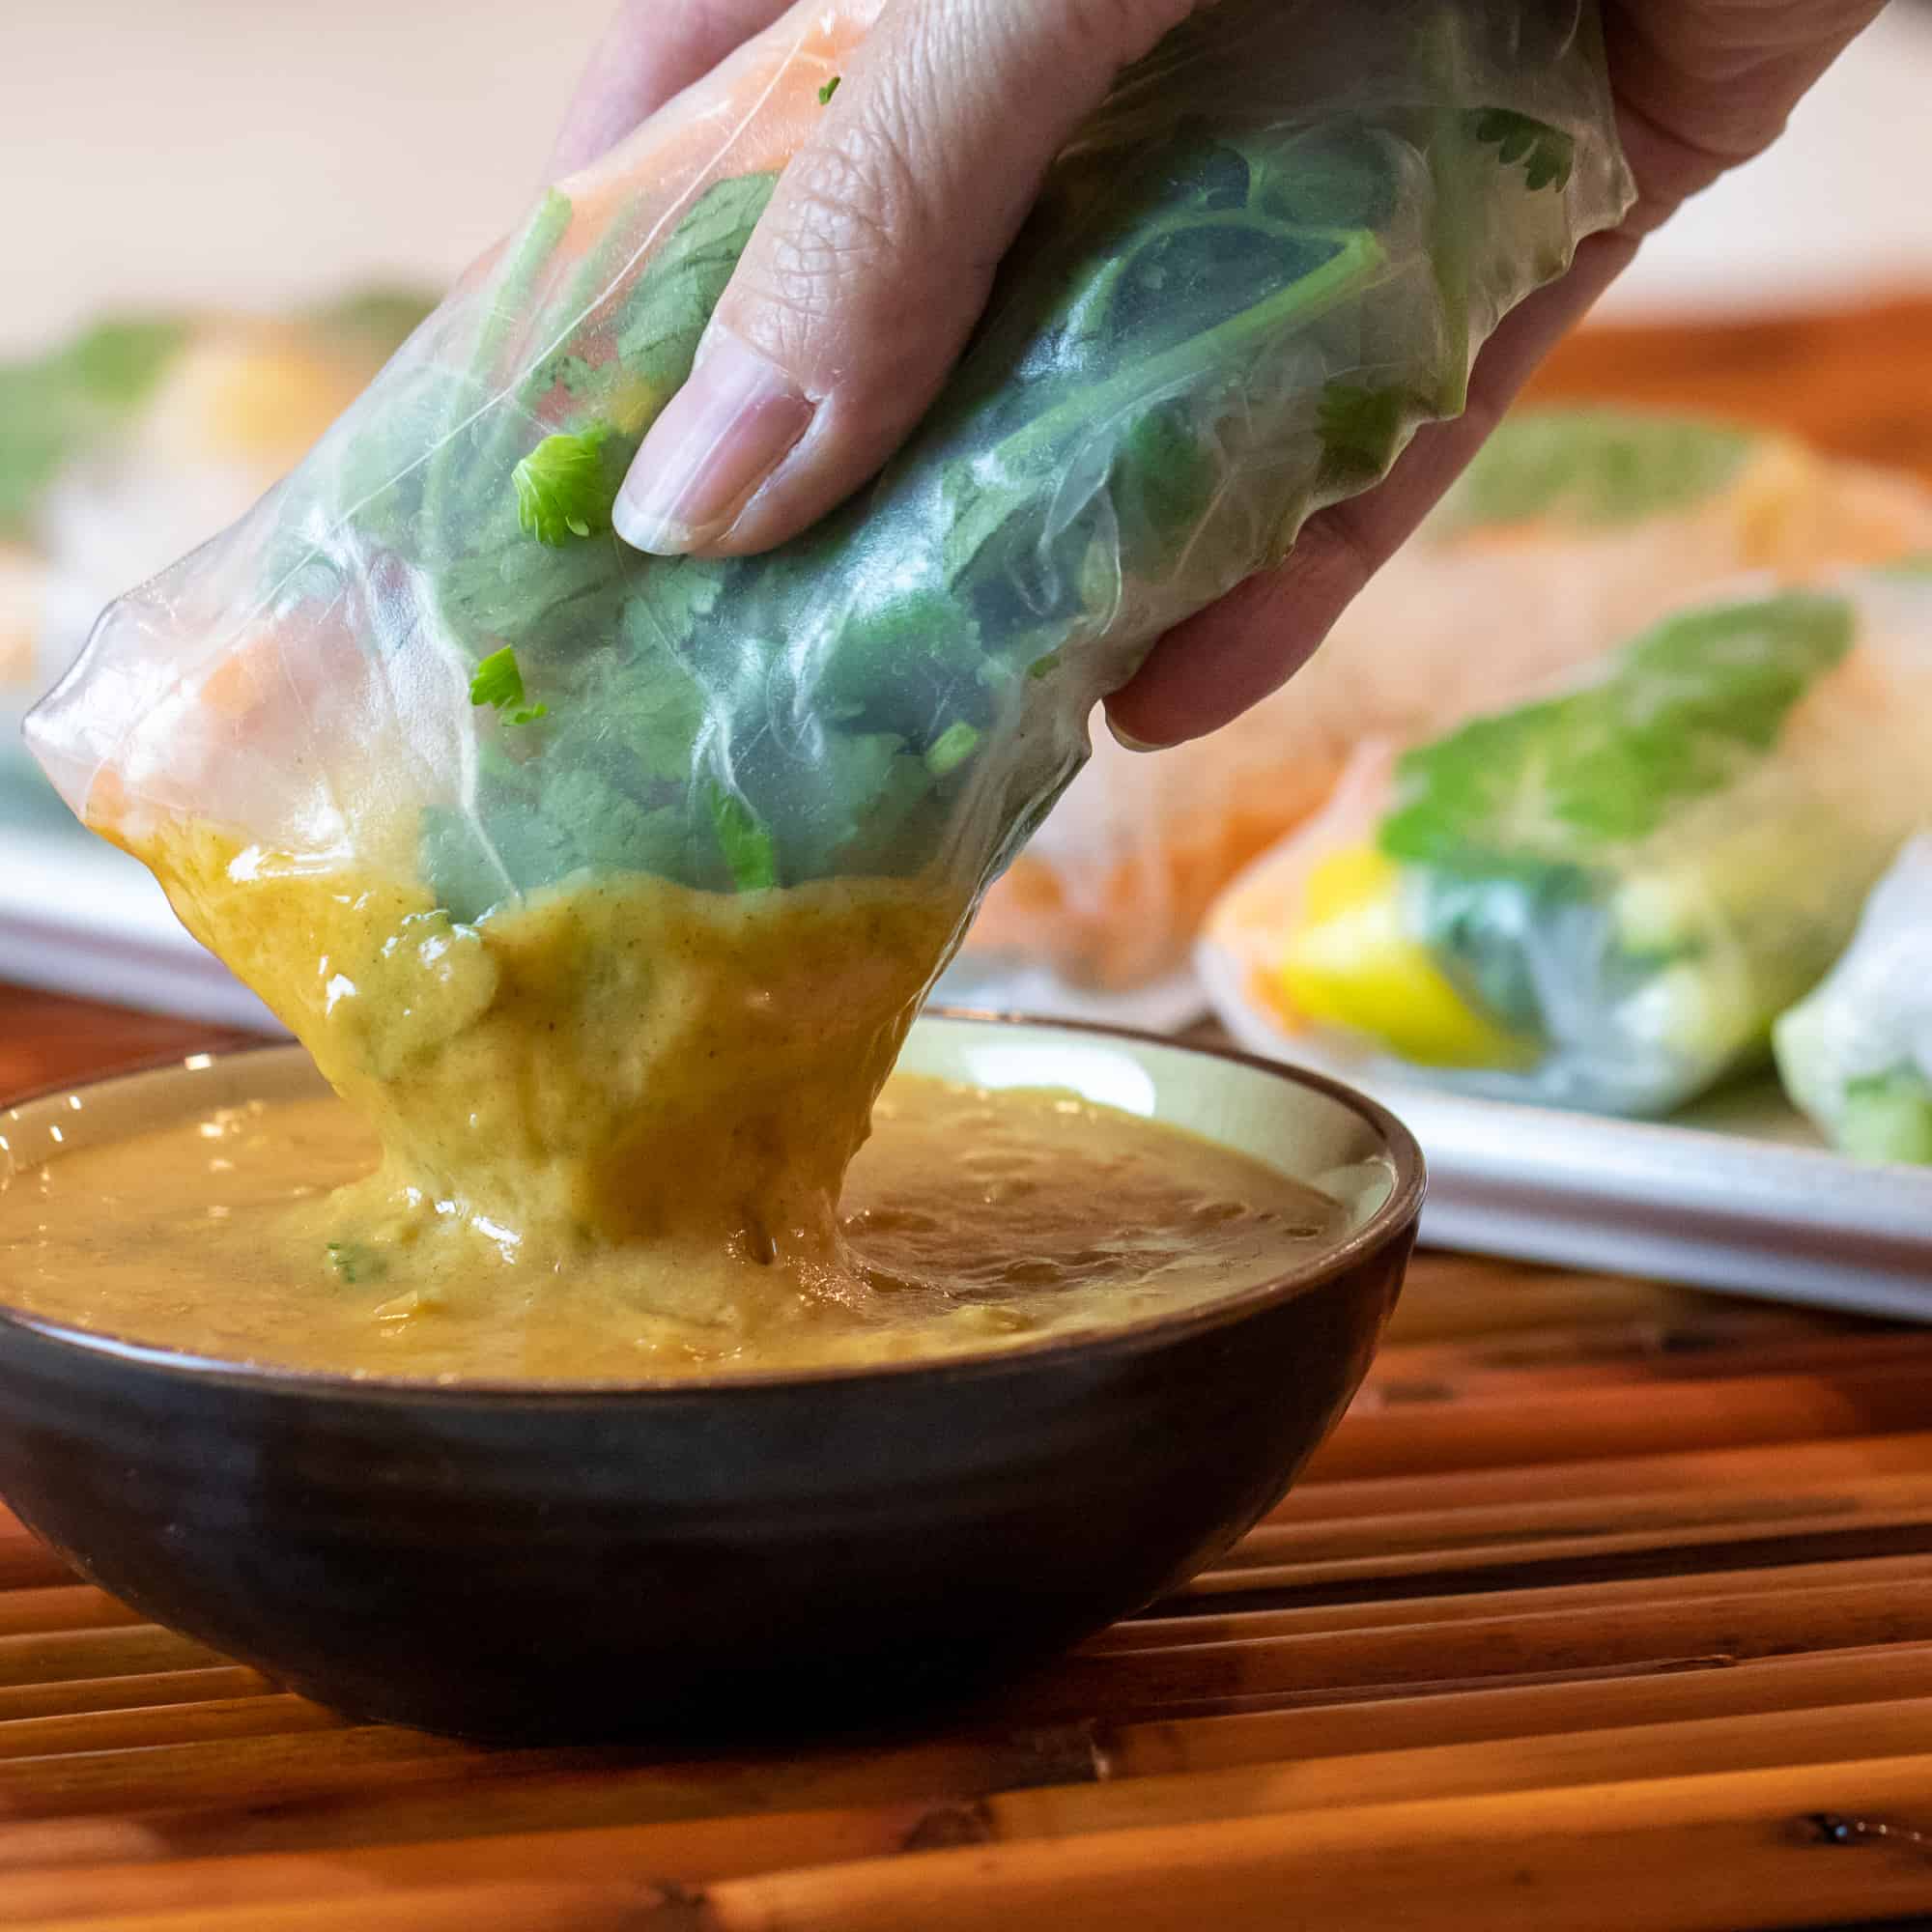 Cold salad spring roll being dipped in a bowl of peanut sauce